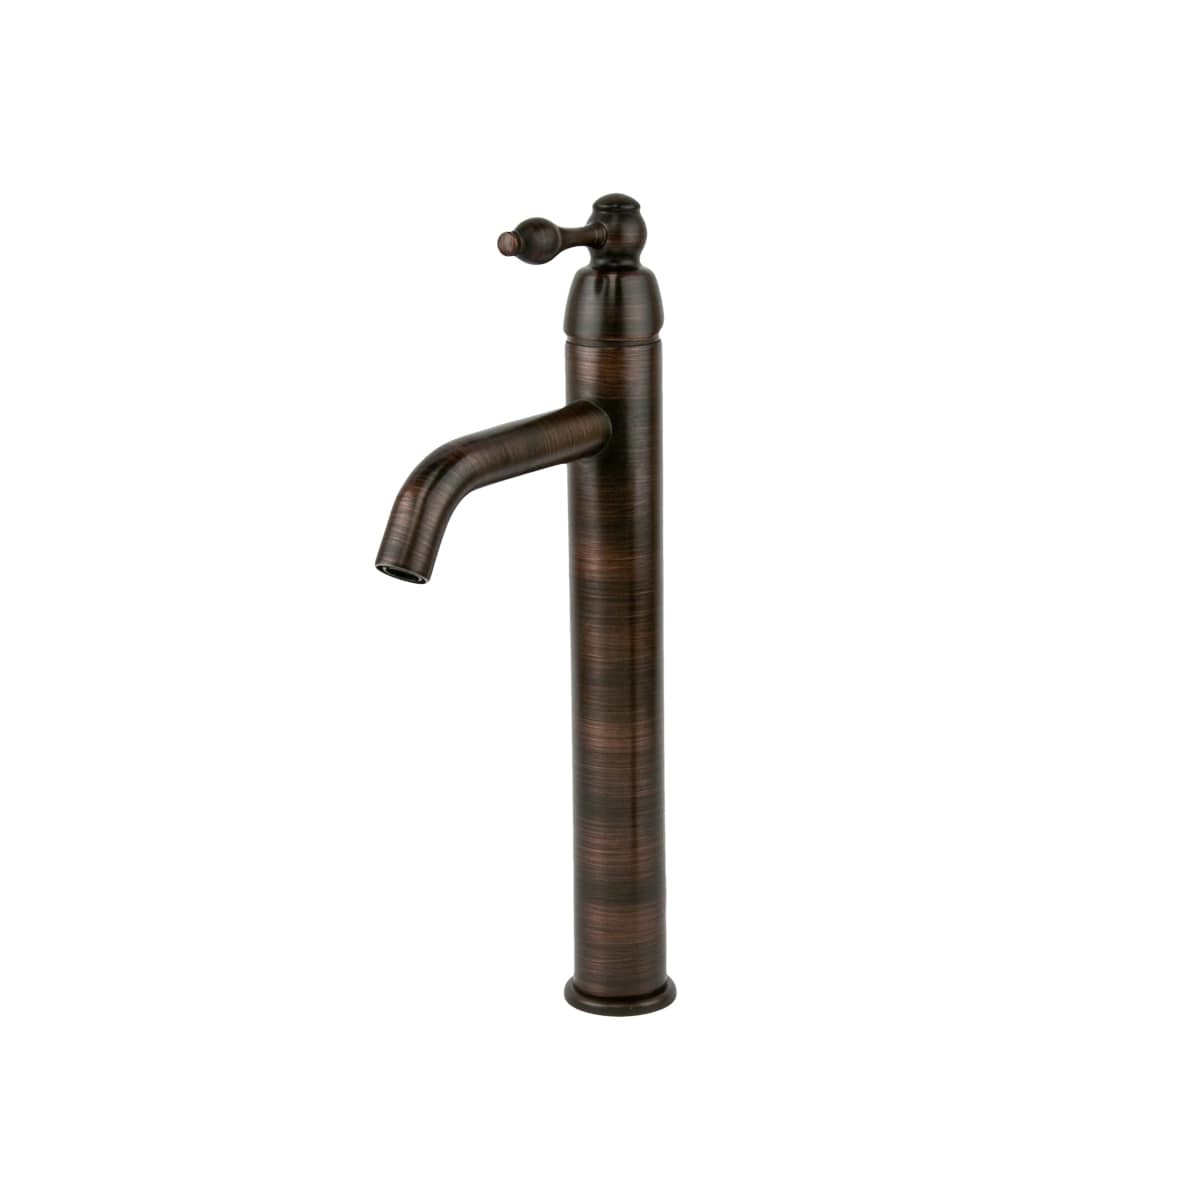 Premier Copper Products B Vf01orb Oil Rubbed Bronze Tru Faucets